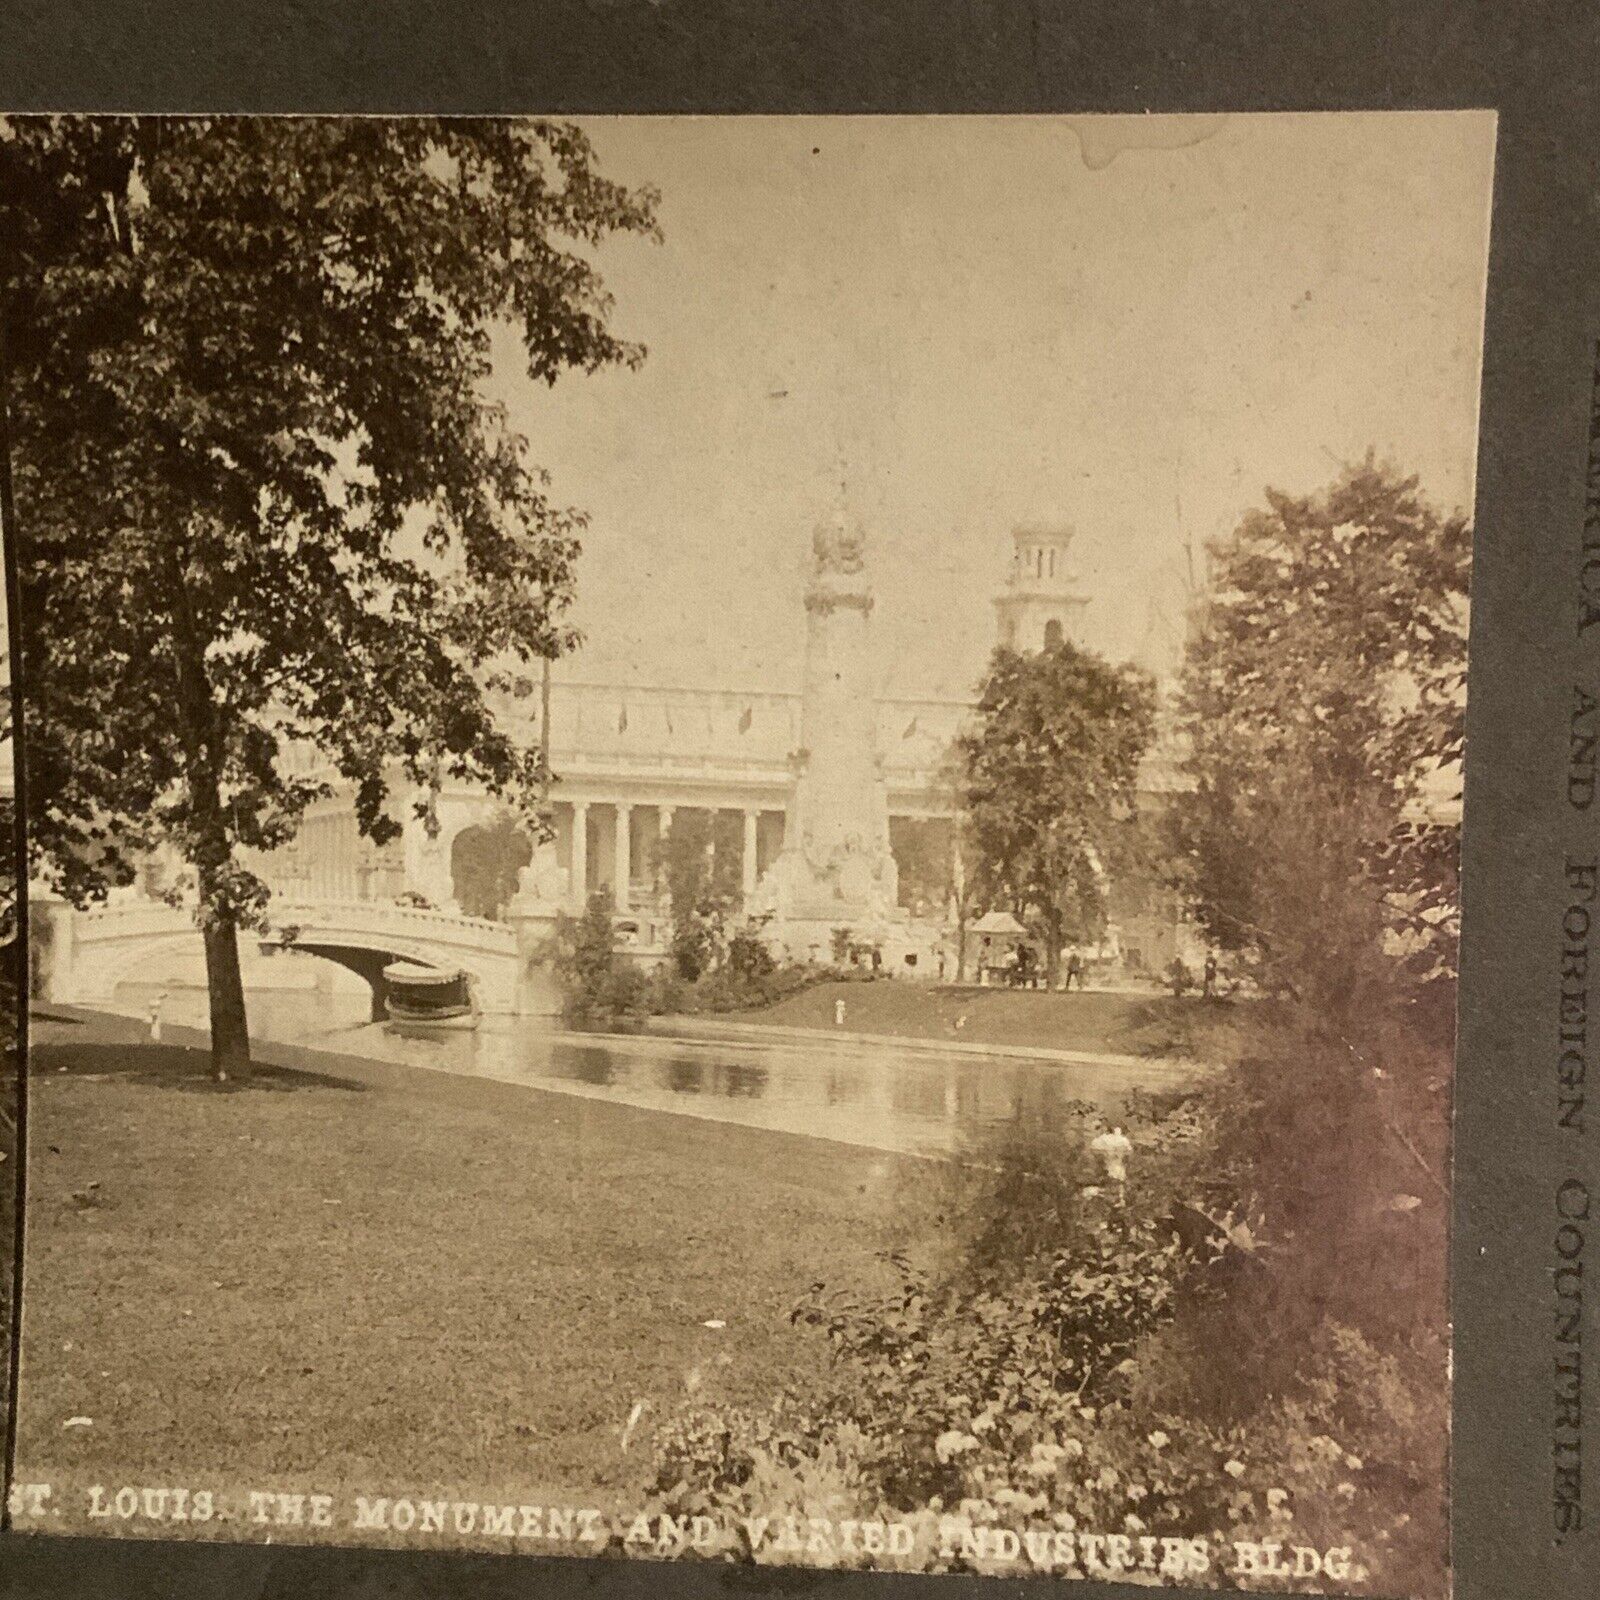 VINTAGE ANTIQUE CAMERA STEREOVIEW STEREOSCOPE CARD St Louis Monument